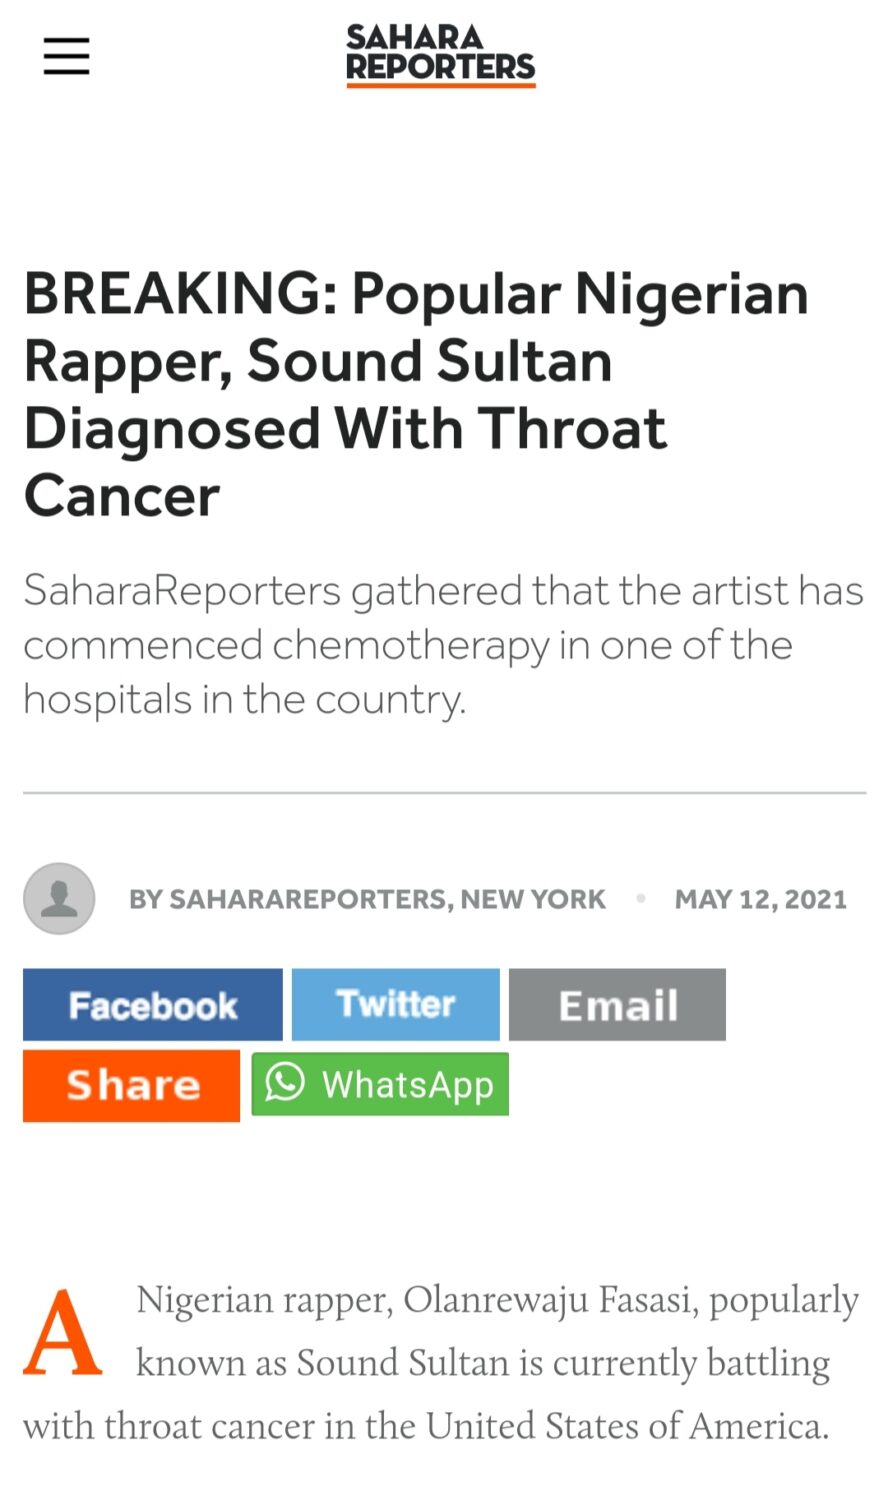 Factchecker: Did Sound Sultan Die Of Throat Cancer As Claimed?